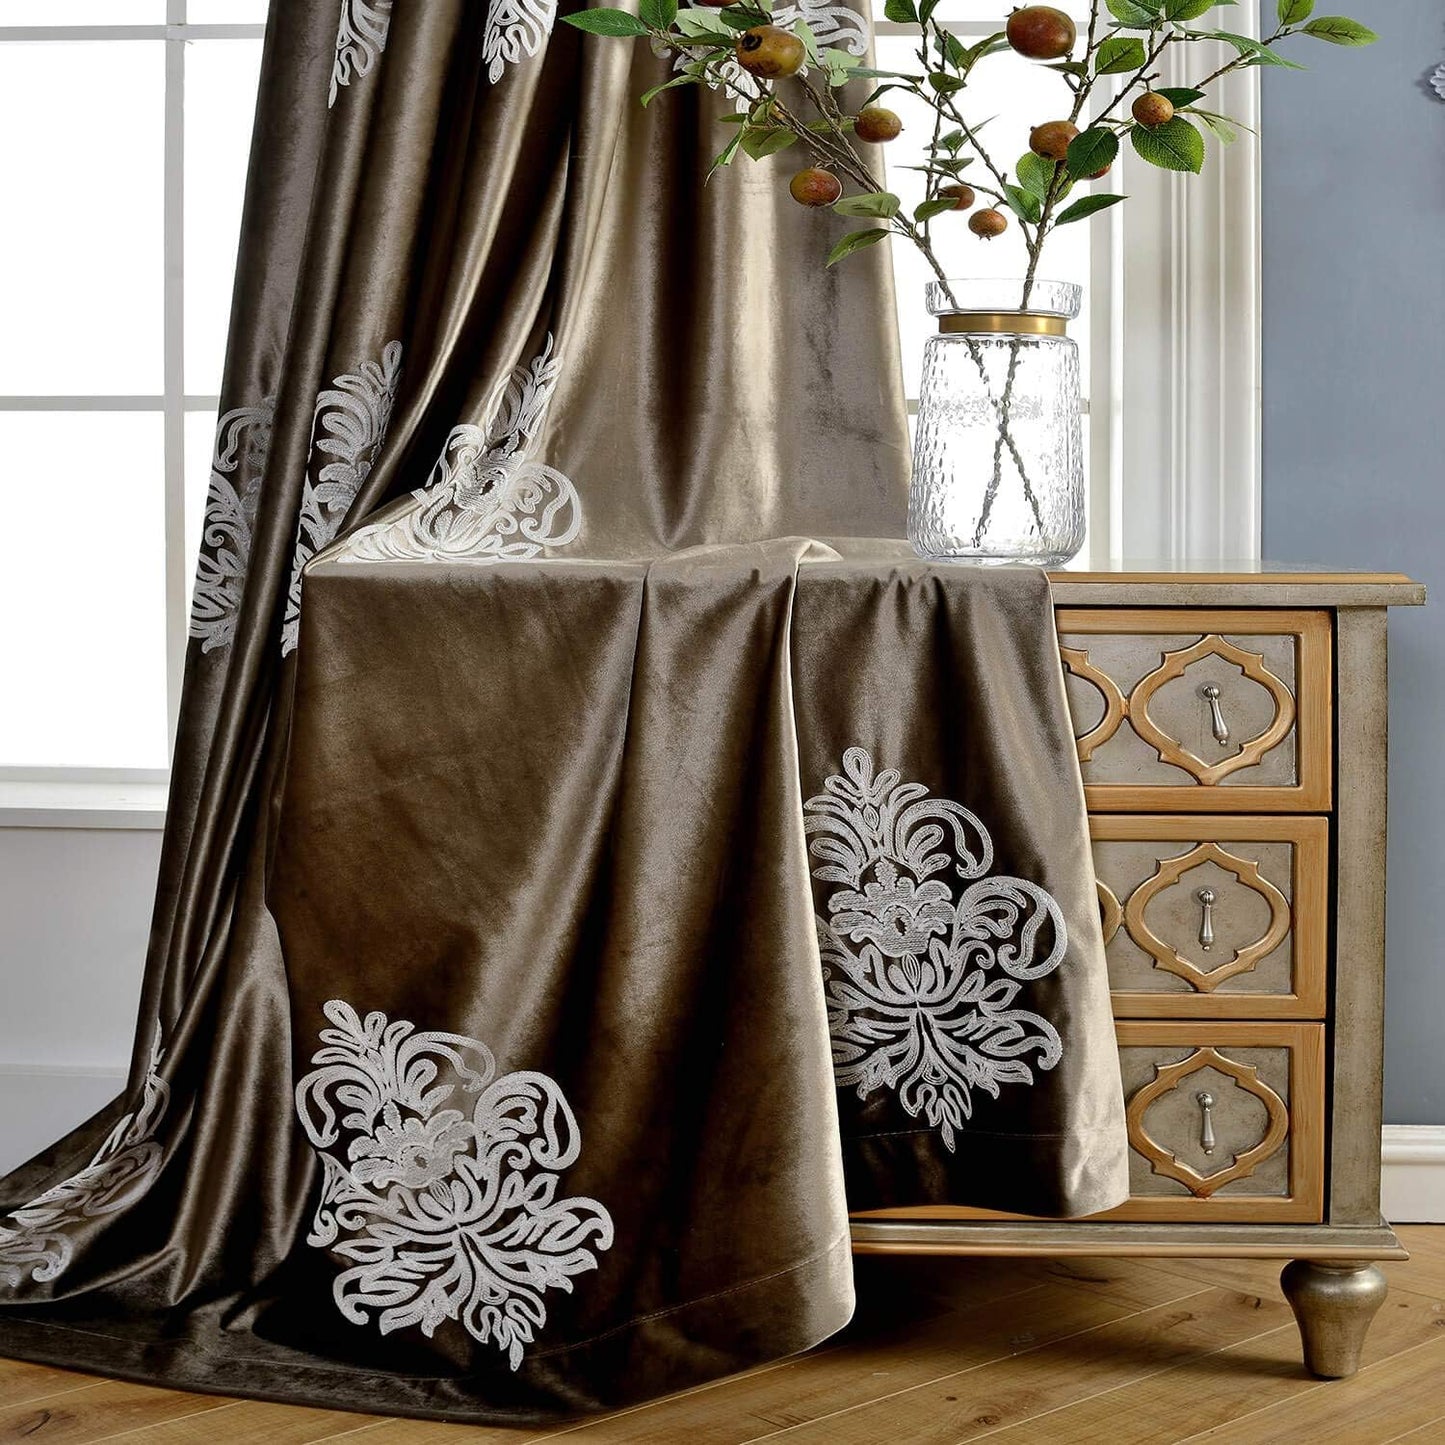 2 Panels European Floral Embroidered Curtains, Blackout Velvet, 52 by 63 Inch, Chocolate Brown